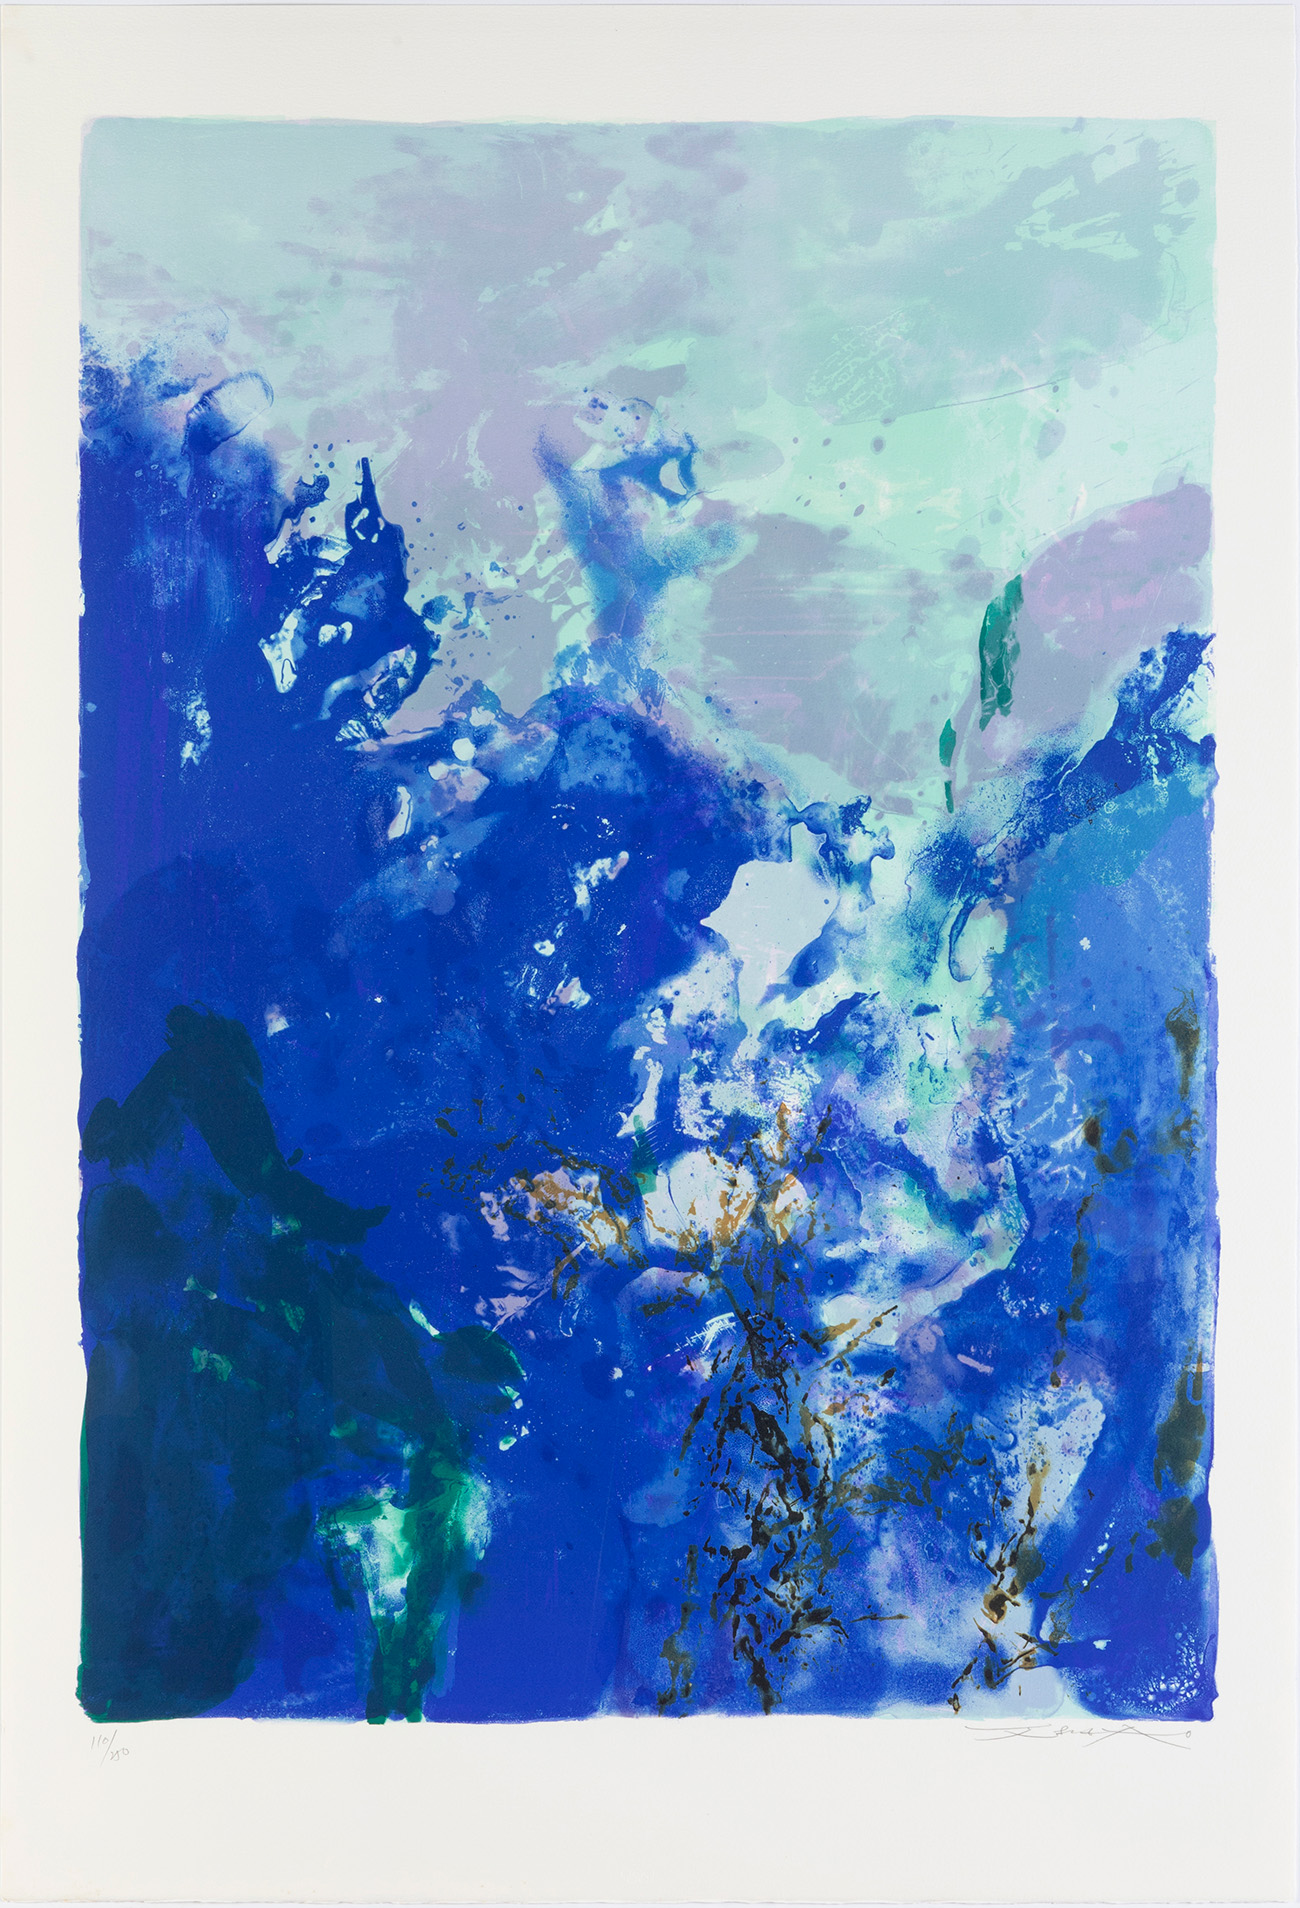 ZAO WOU KI (Beijing, 1921 - Nyon, Switzerland, 2013).Untitled, from the Suite Olympic Centennial,